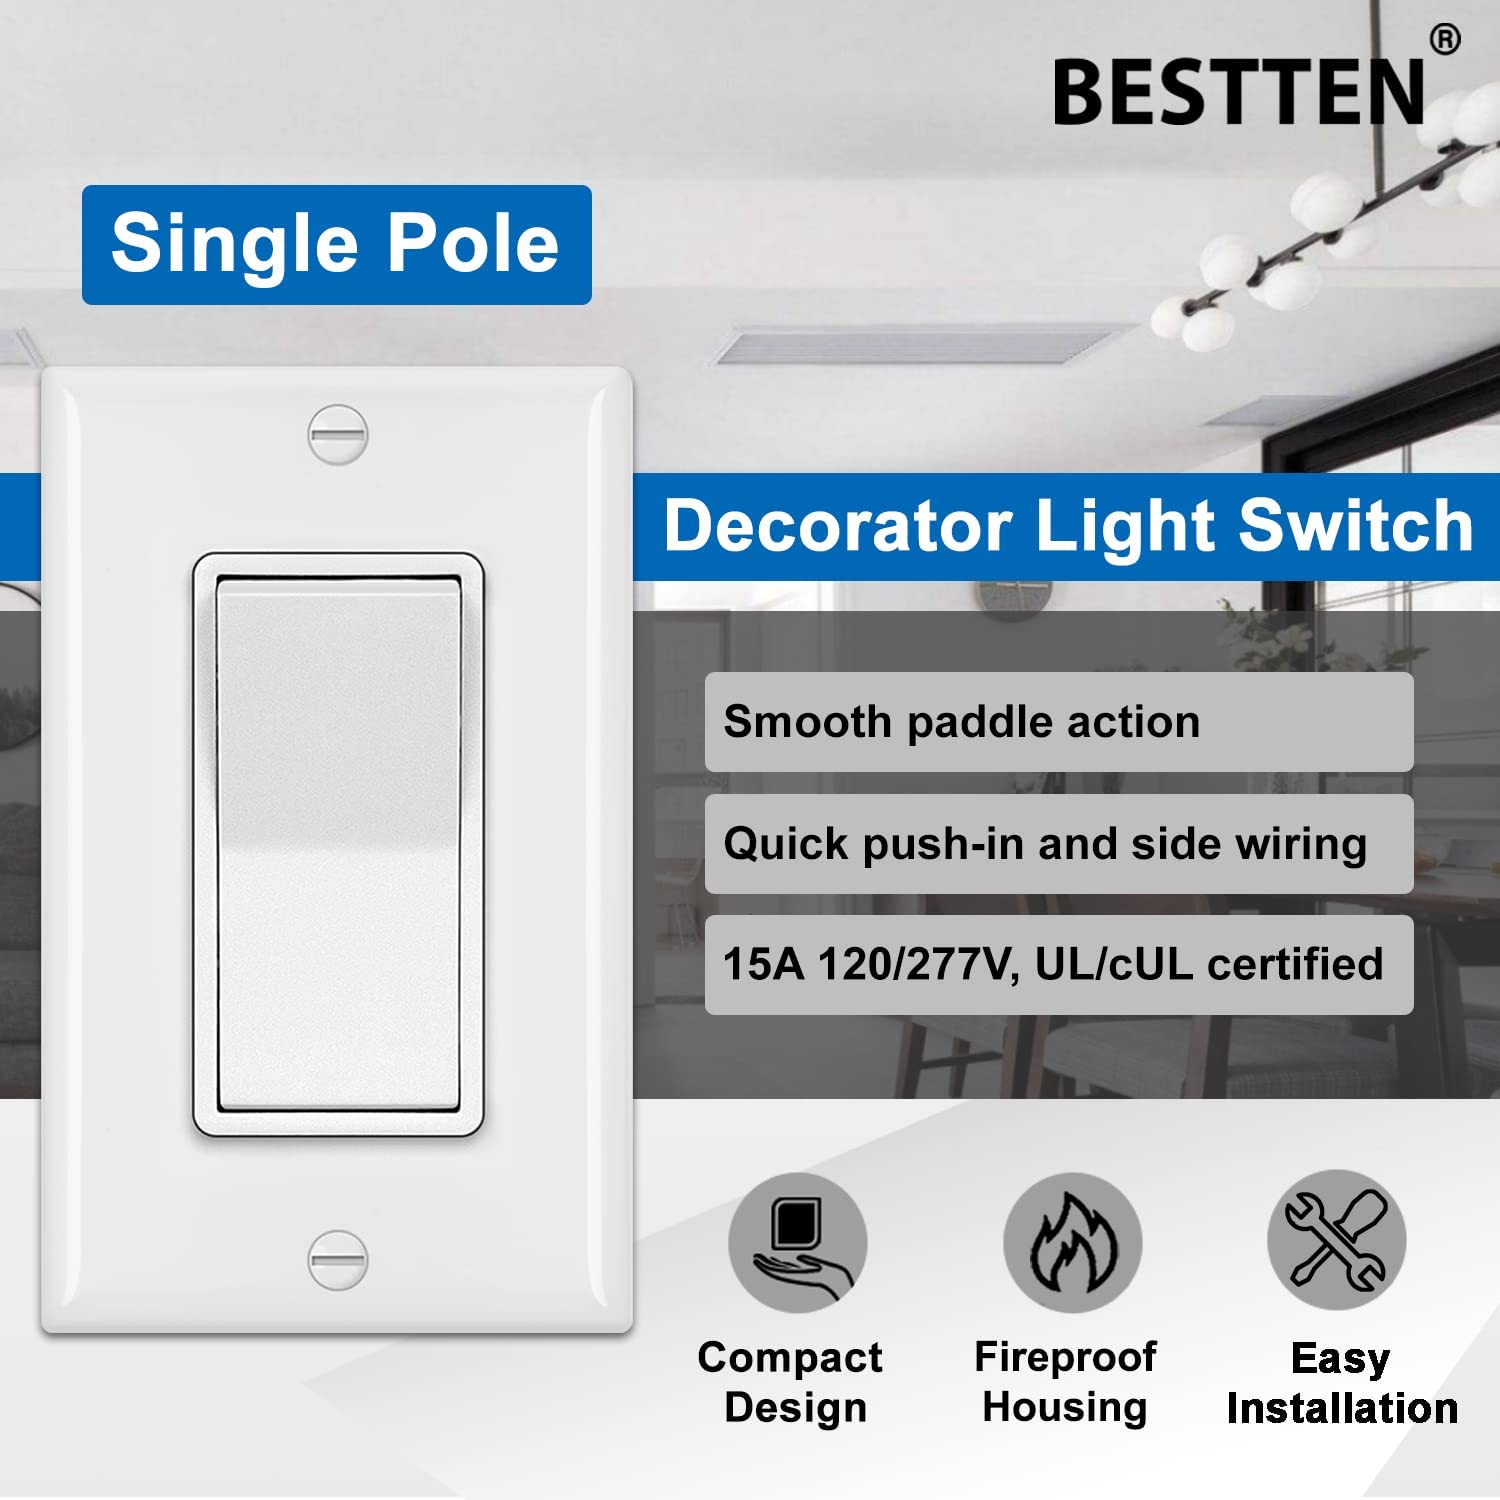 [10 Pack] BESTTEN Single Pole Decorator Wall Light Switch with Wallplate, 15A 120/277V, On/Off Rocker Paddle Interrupter for LED and other Lamps, UL Listed, White - image 3 of 7